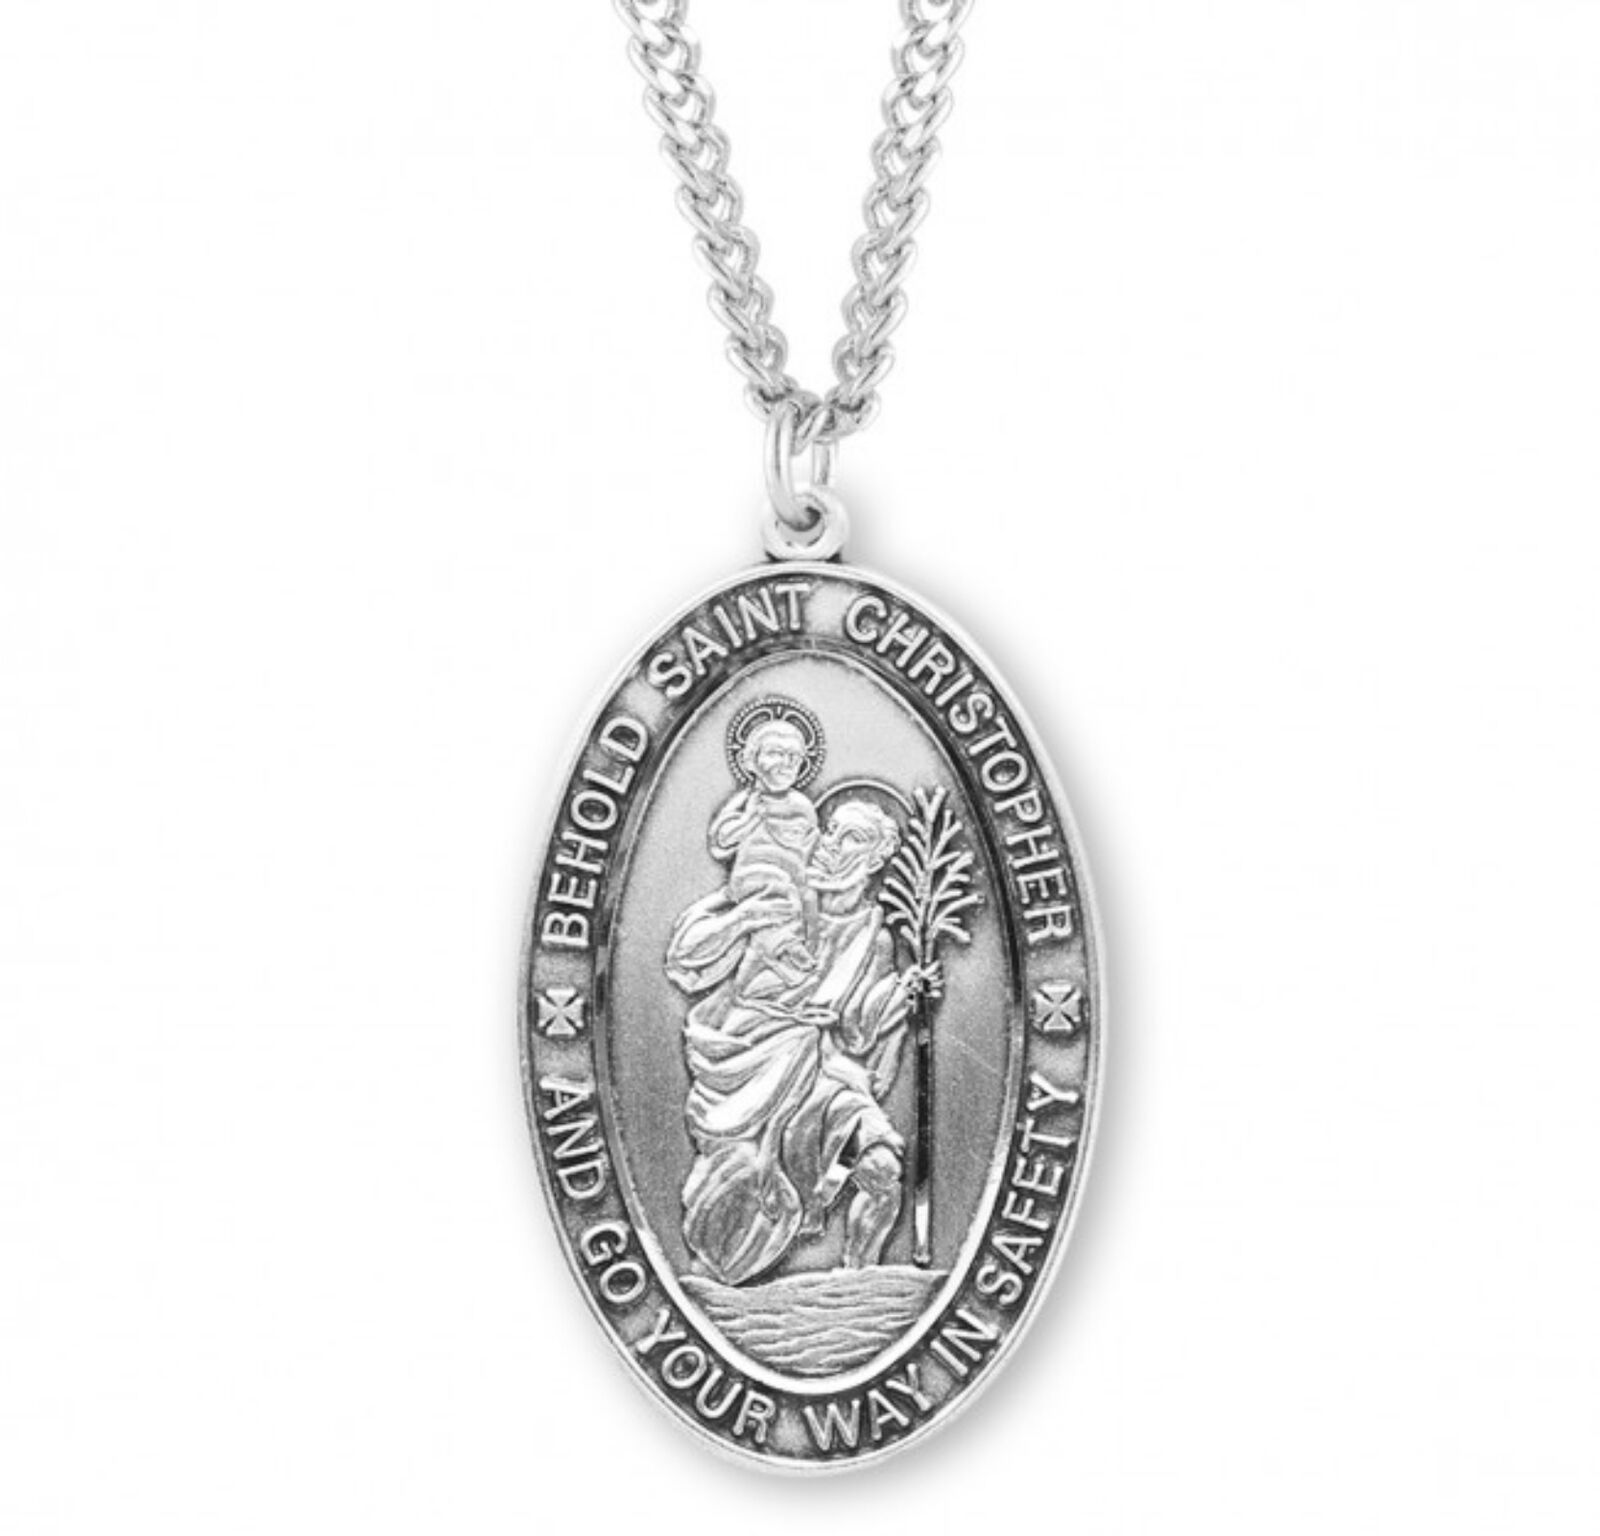 N.G. Sterling Silver Behold St Christopher Medal on 24 Inch Necklace Chain